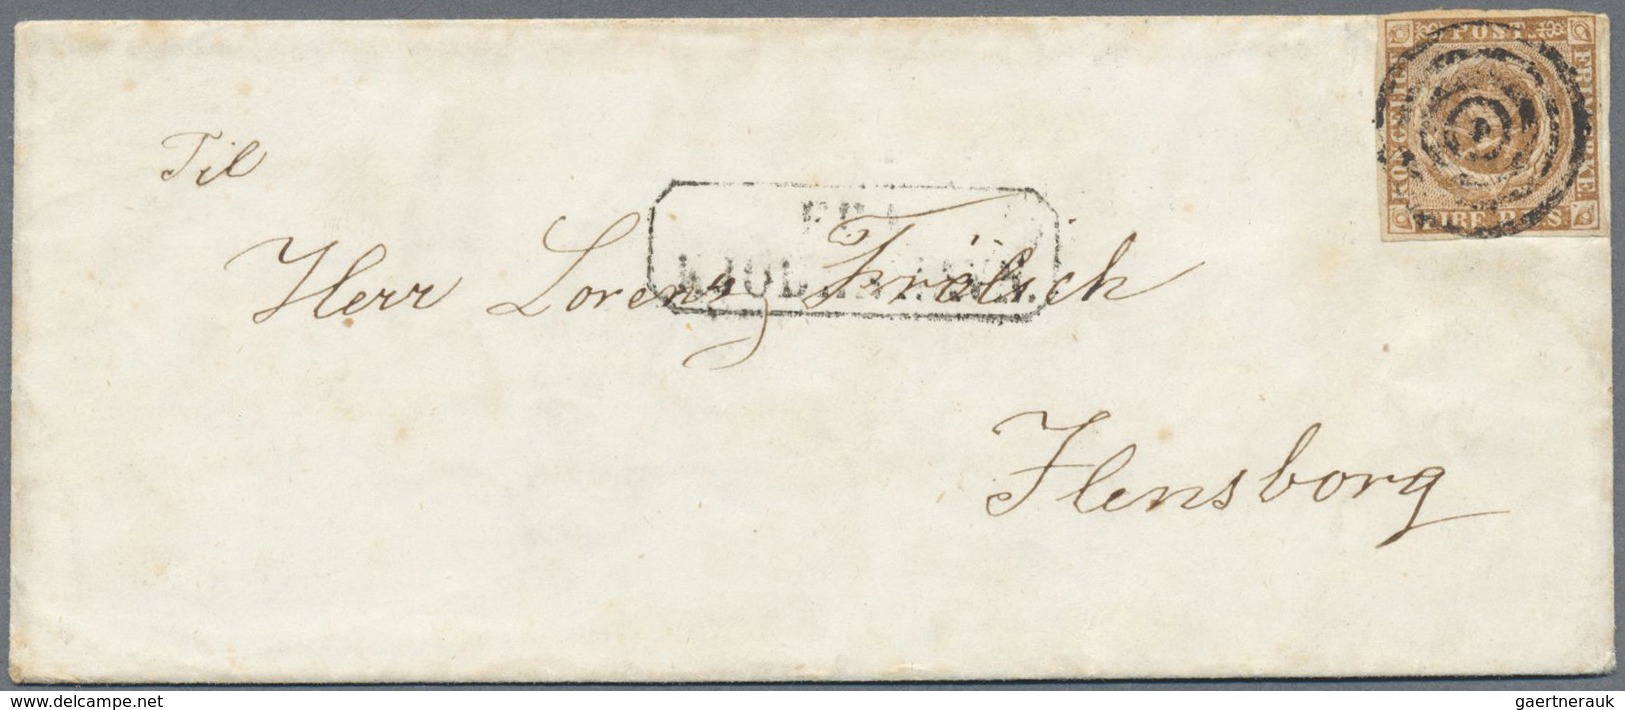 Br Dänemark - Stempel: 1856, Extremly Rare MUTE 5-RING CANCEL (stummer 5-Ring Stempel) On Small Cover. - Machines à Affranchir (EMA)